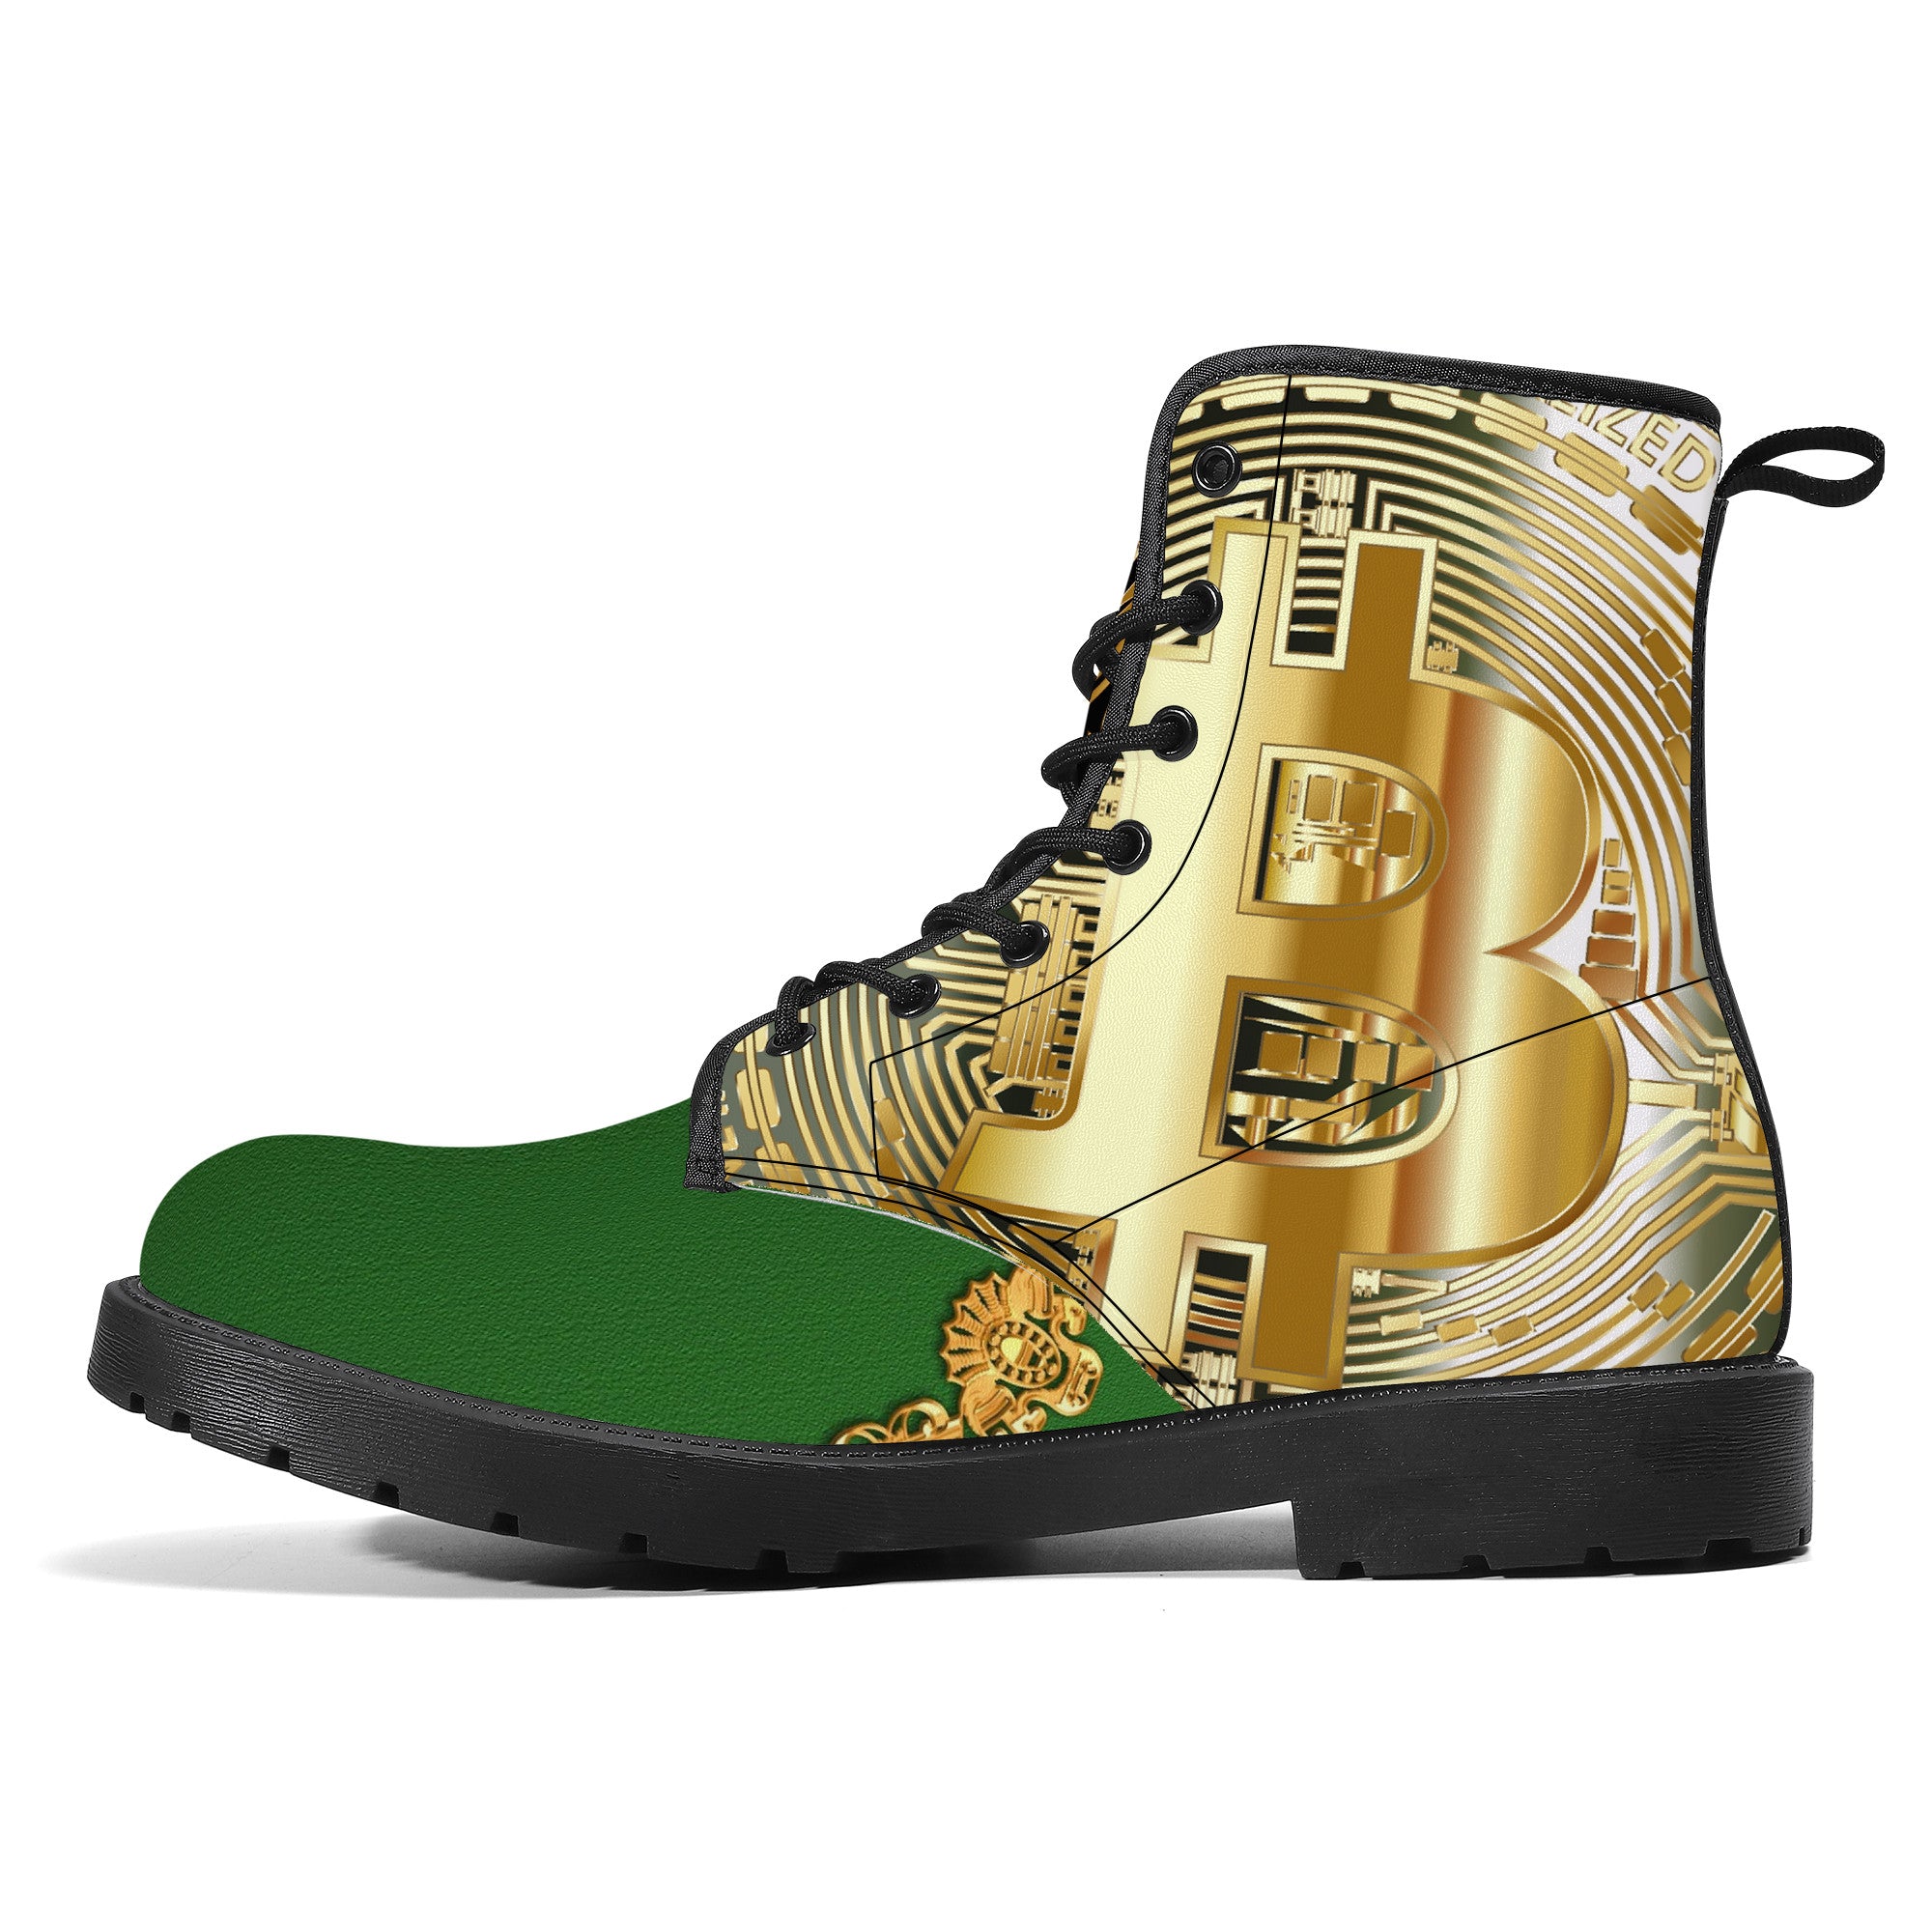 Bitcoin Boots Synthetic Vegan Leather | Boots Customized | Shoe Zero